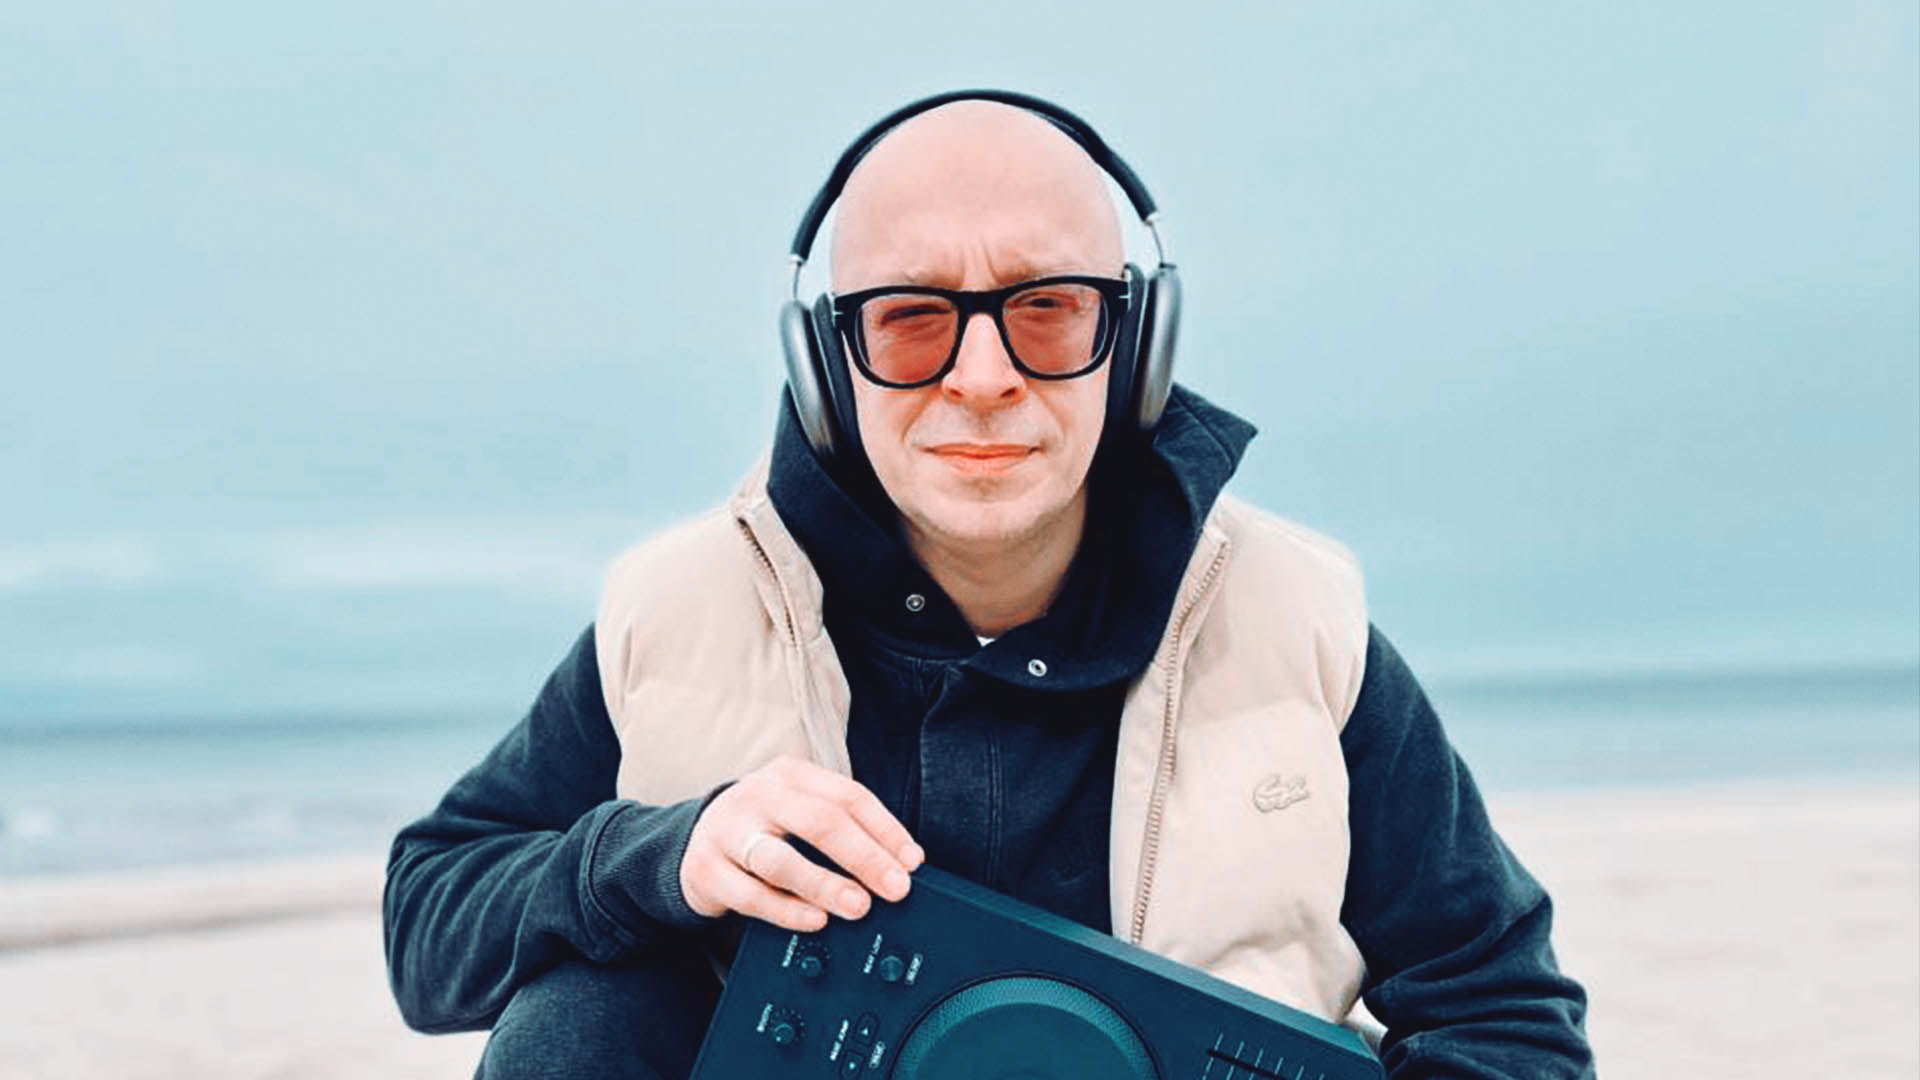 DJ Remo holding a MIDI controller on a beach, symbolizing his return to music production.